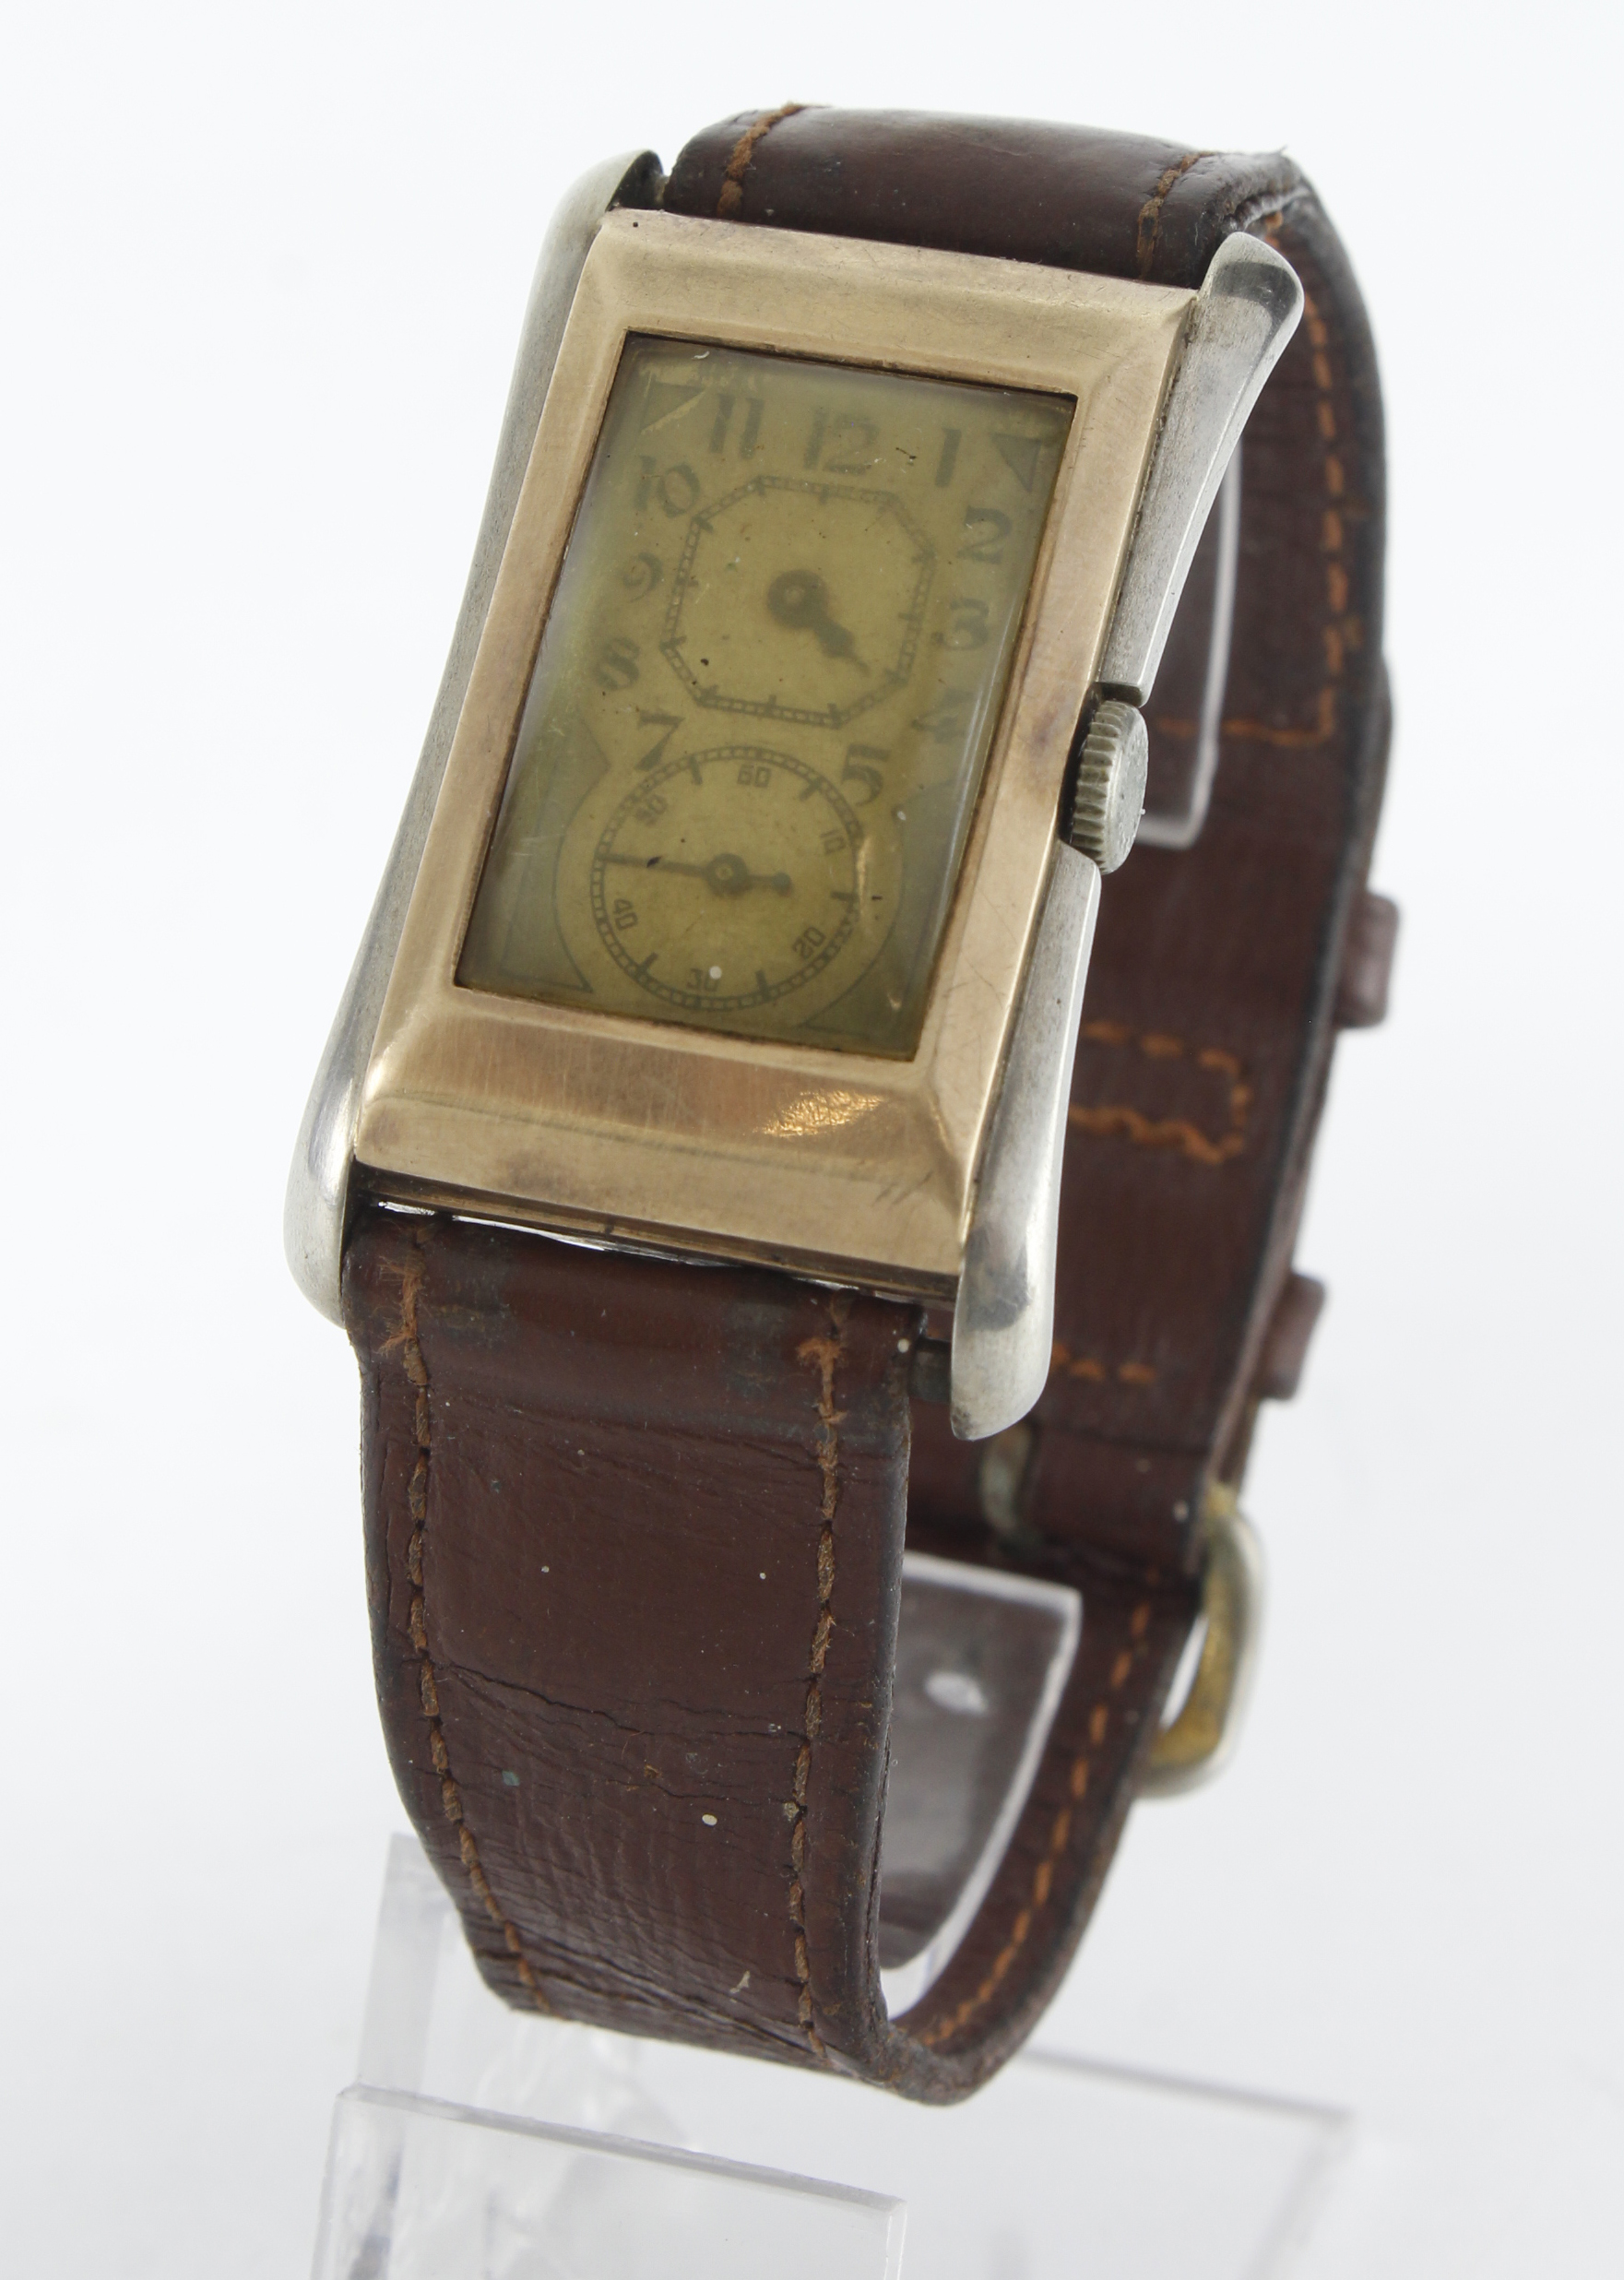 Gents 9ct cased Rolex wristwatch. Import marks for Glasgow 1929. The oblong case with unsigned